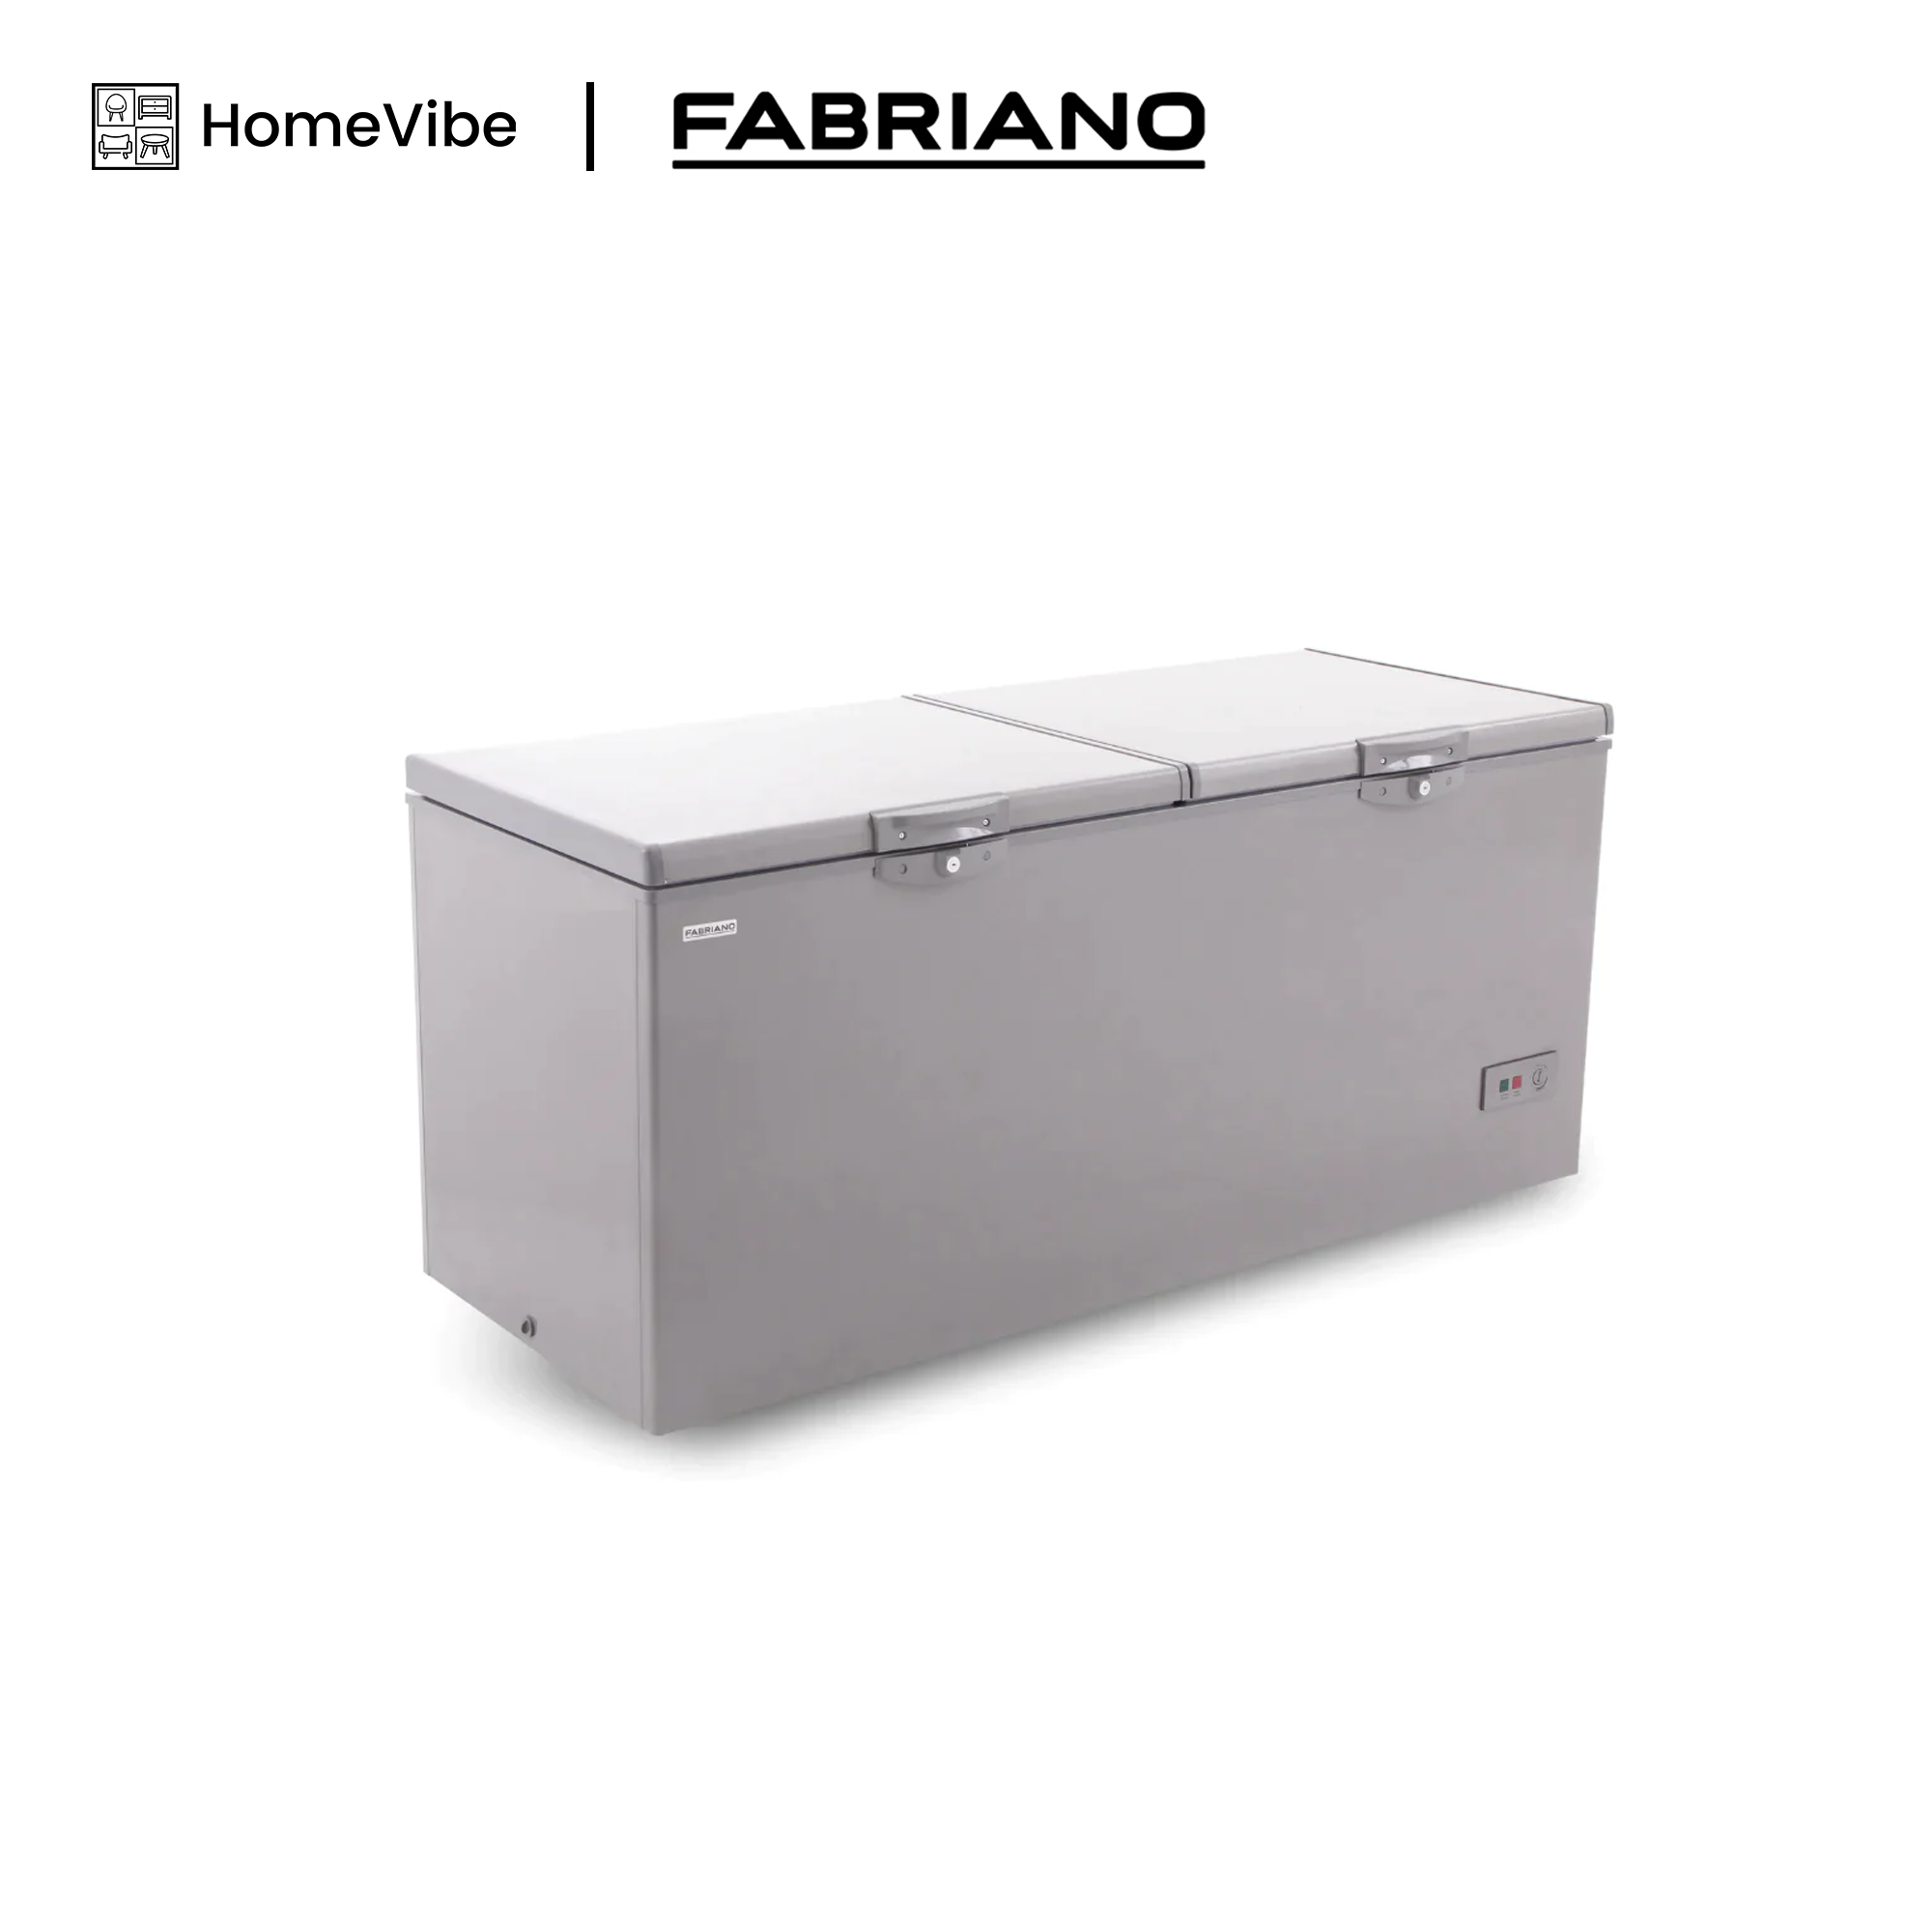 Fabriano 20cuft Solidtop Dual Function Chest Freezer FSTC20SG